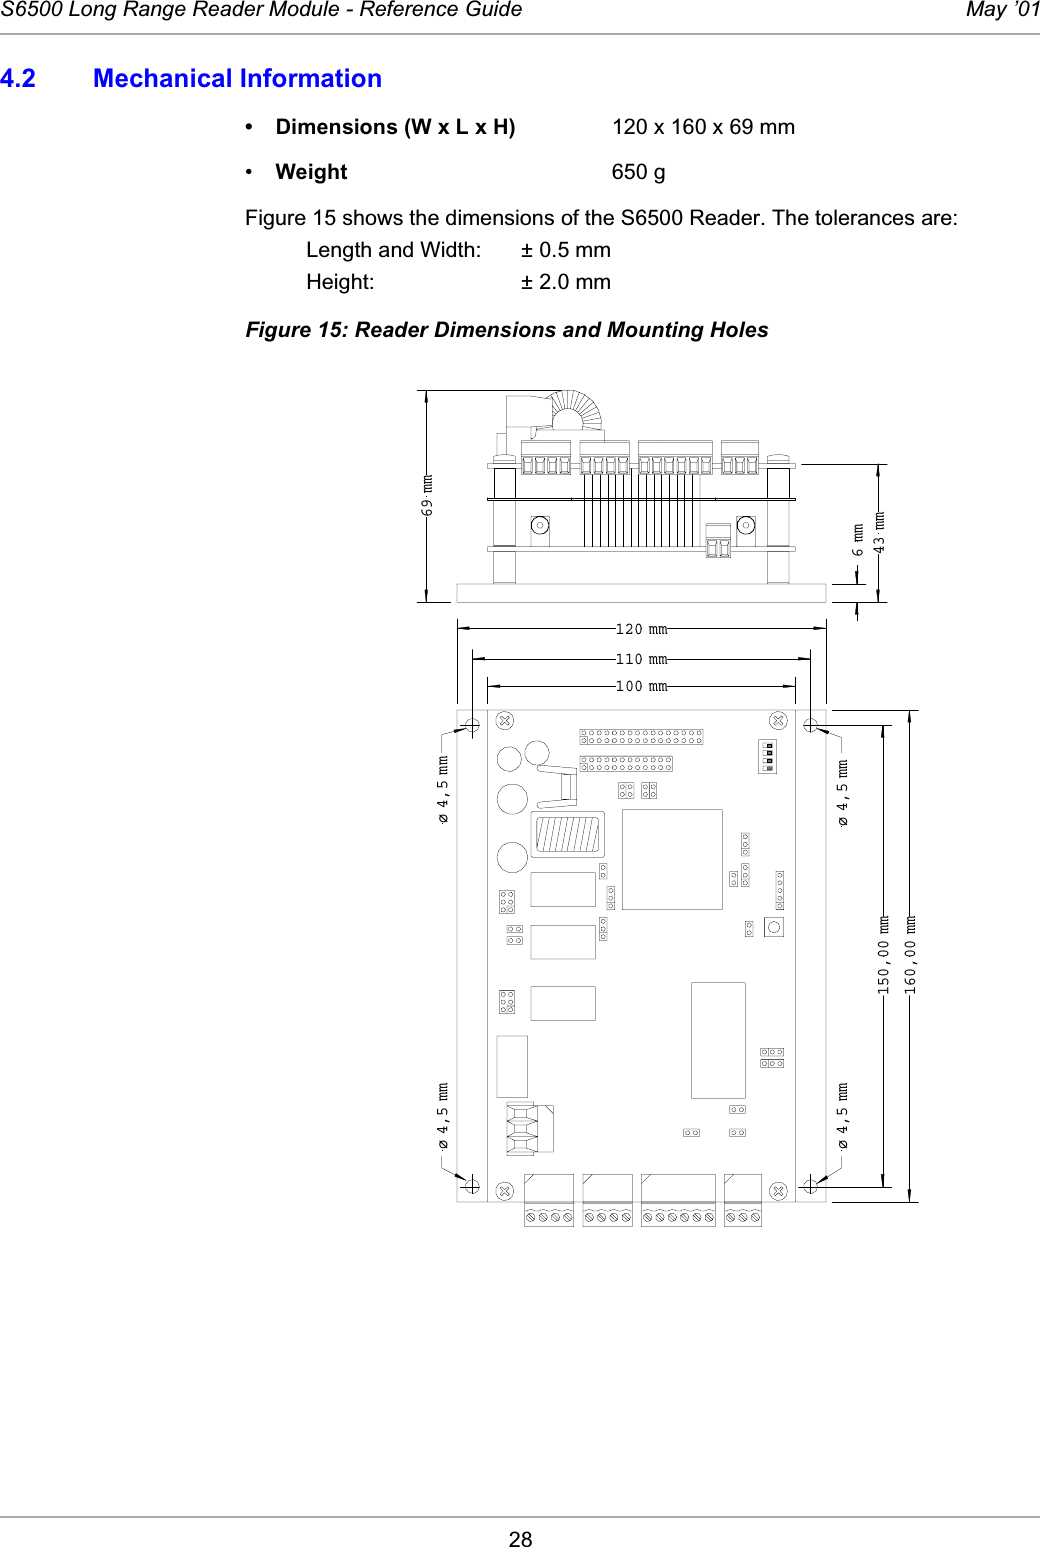 28S6500 Long Range Reader Module - Reference Guide May ’014.2 Mechanical Information• Dimensions (W x L x H) 120 x 160 x 69 mm•Weight 650 gFigure 15 shows the dimensions of the S6500 Reader. The tolerances are: Length and Width: ± 0.5 mmHeight: ± 2.0 mmFigure 15: Reader Dimensions and Mounting Holes150,00 mm160,00 mm100 mm110 mm120 mm6 mm43 mm69 mmø 4,5 mmø 4,5 mmø 4,5 mm ø 4,5 mm